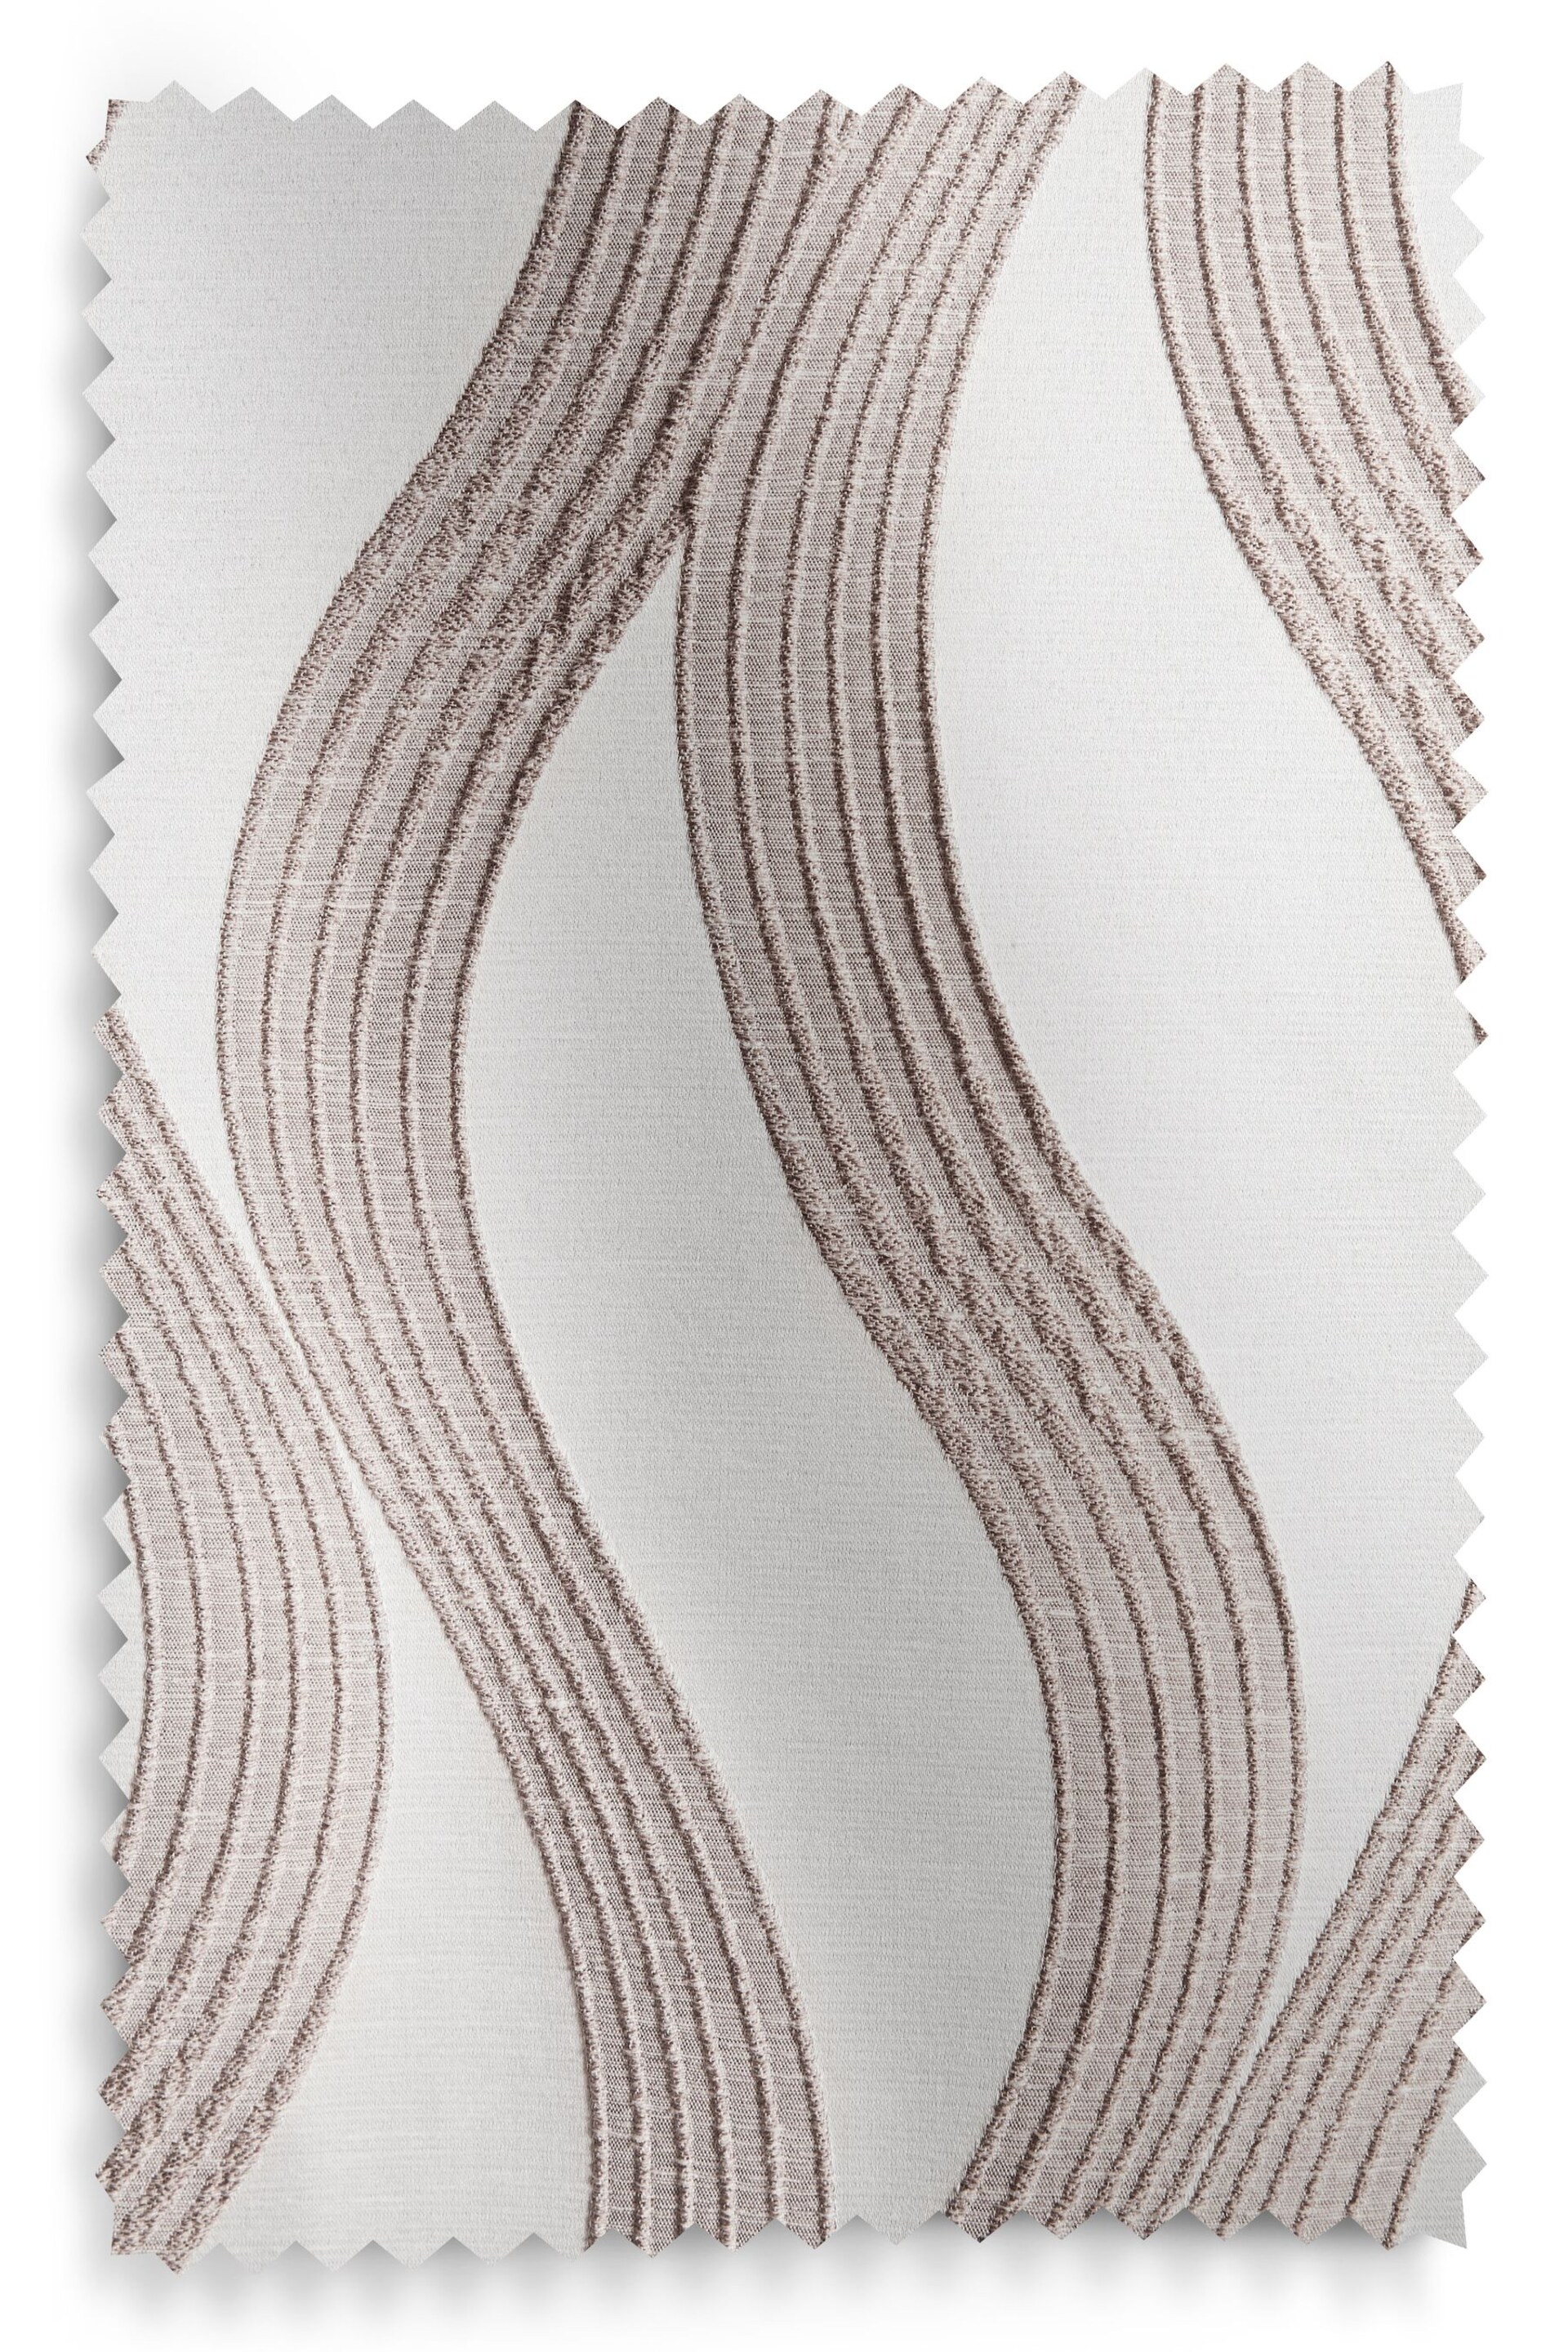 Natural Jacquard Swirl Eyelet Lined Curtains - Image 5 of 5